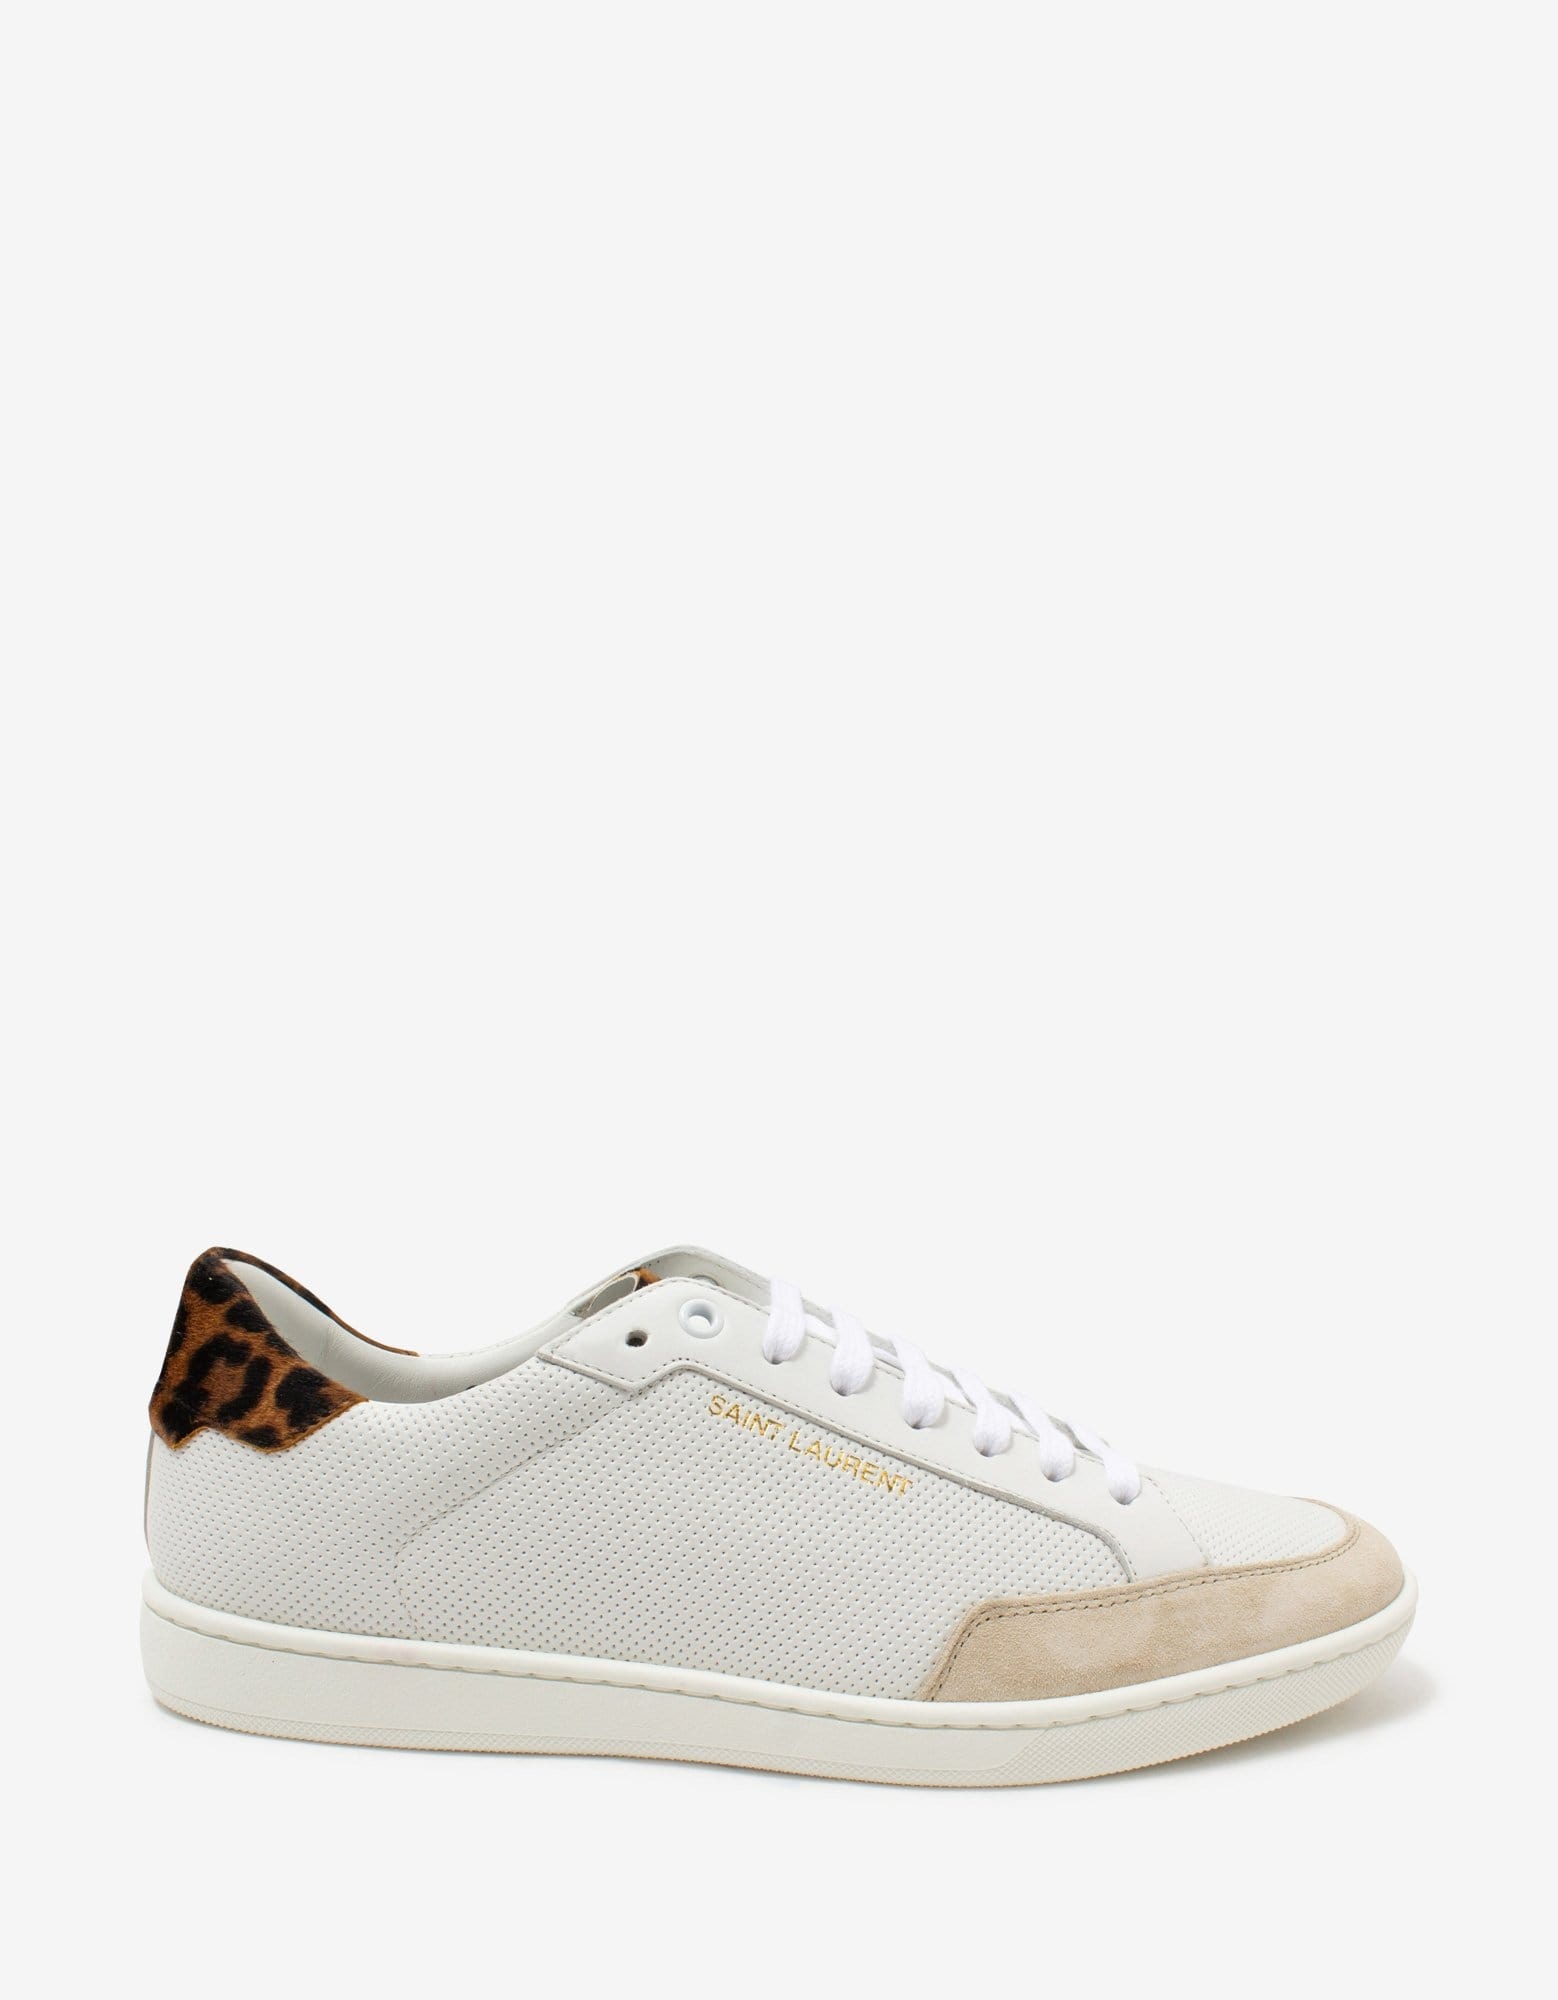 Court Classic SL/10 White Perforated Leather Trainers - 2